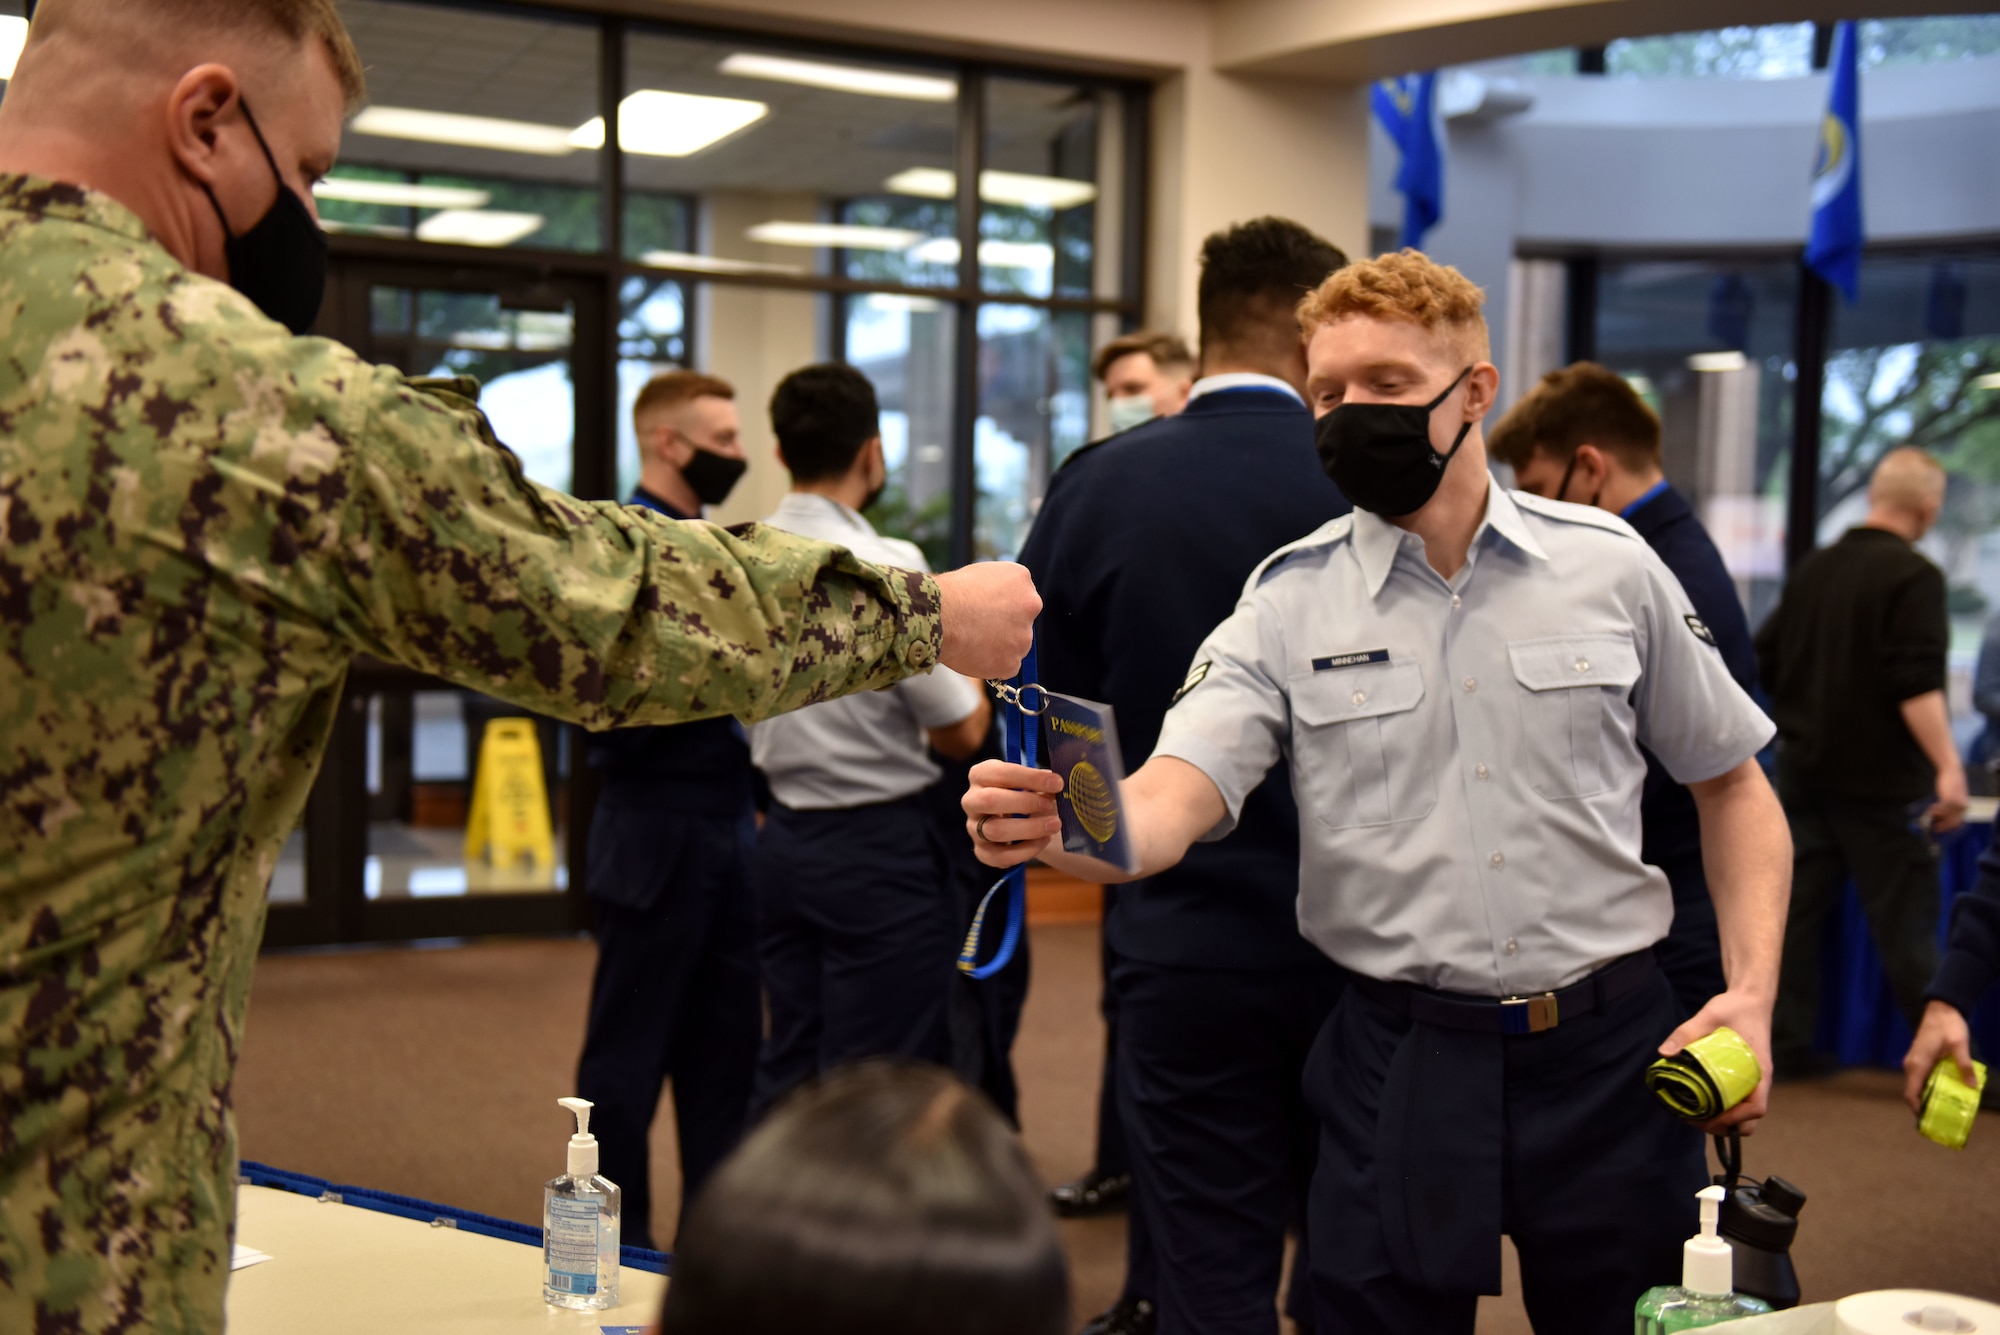 U.S. Navy Chief Petty Officer Jason Sikora, 316th Training Squadron instructor, hands Airman 1st Class Devin Minnehan, 316th TRS student, his passport during the Around the World International Cultural fair at Angelo State University in San Angelo, Texas, April 29, 2021. The passports were one of many items from the fair that students could take with them when finished touring the different culture booths. (U.S. Air Force photo by Staff Sgt. Seraiah Wolf)